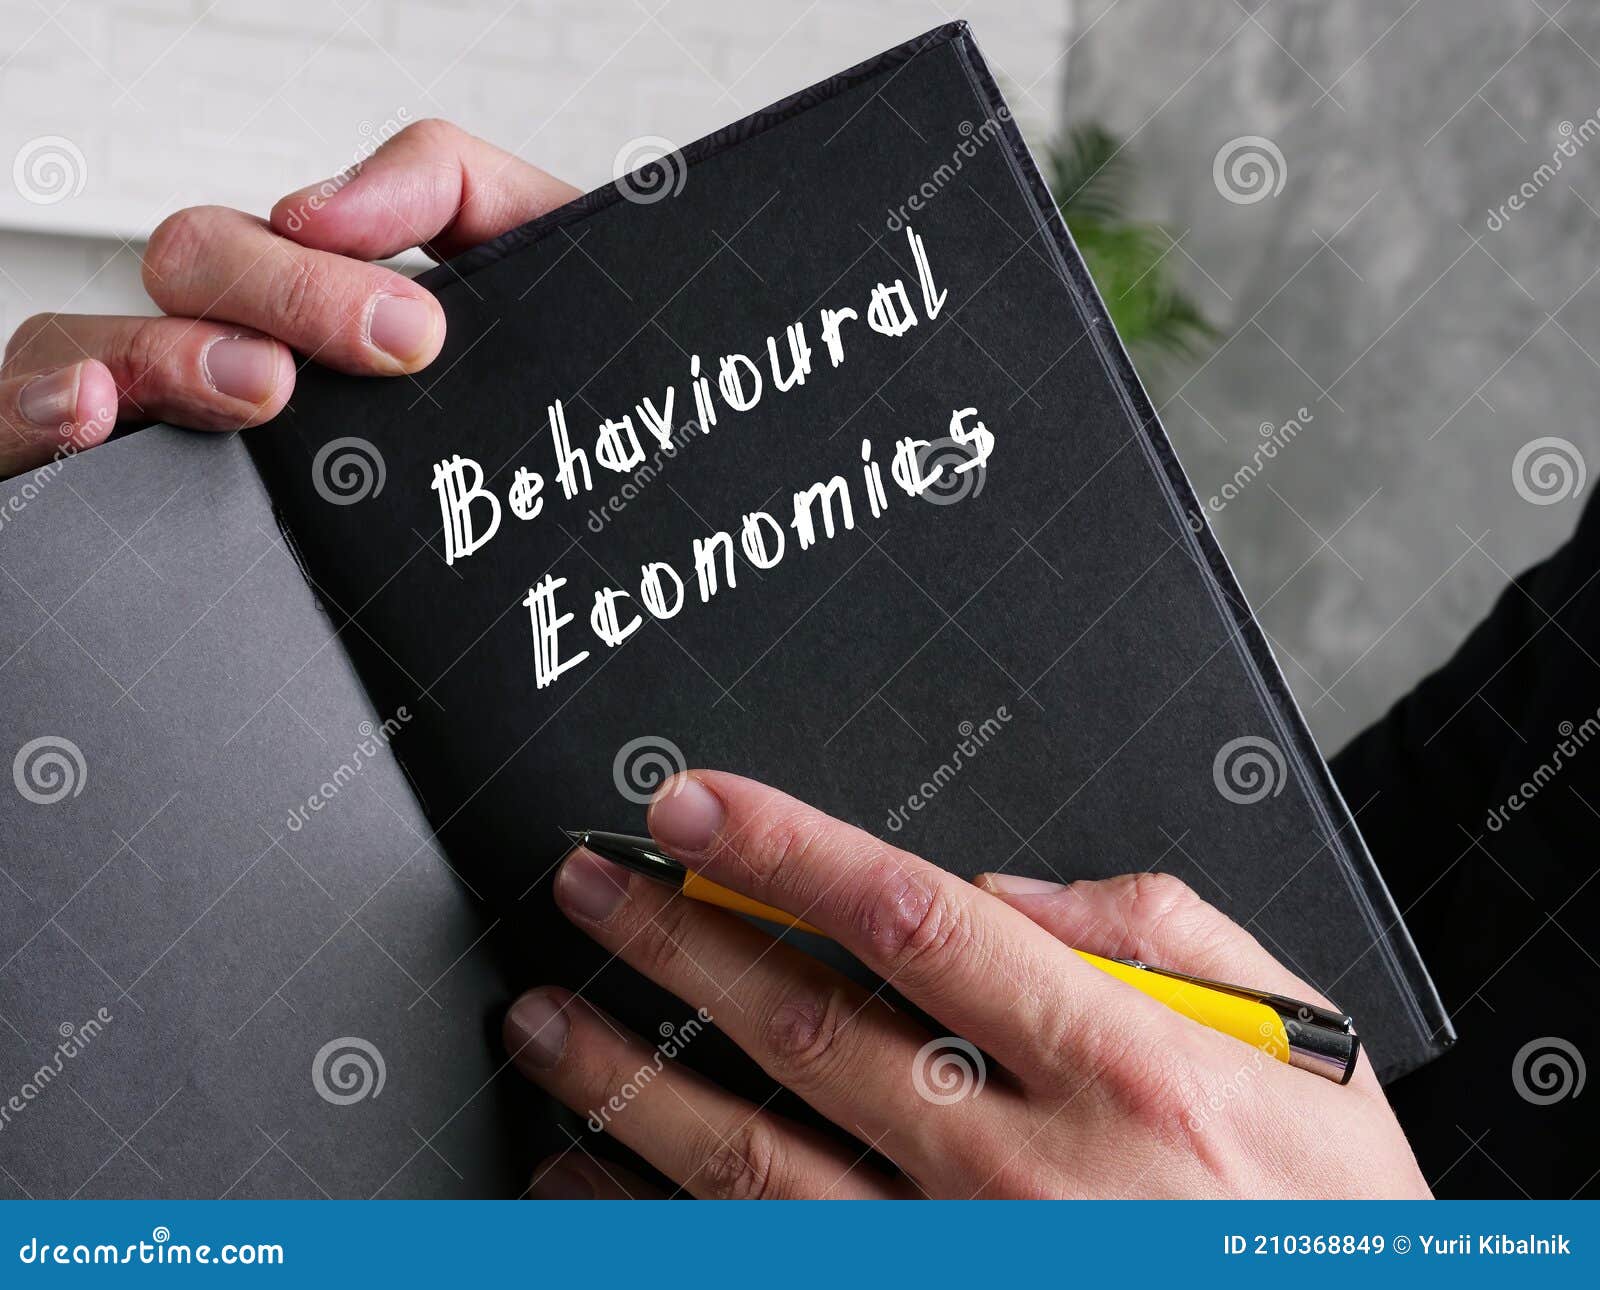 business concept about behavioural economics with phrase on the page